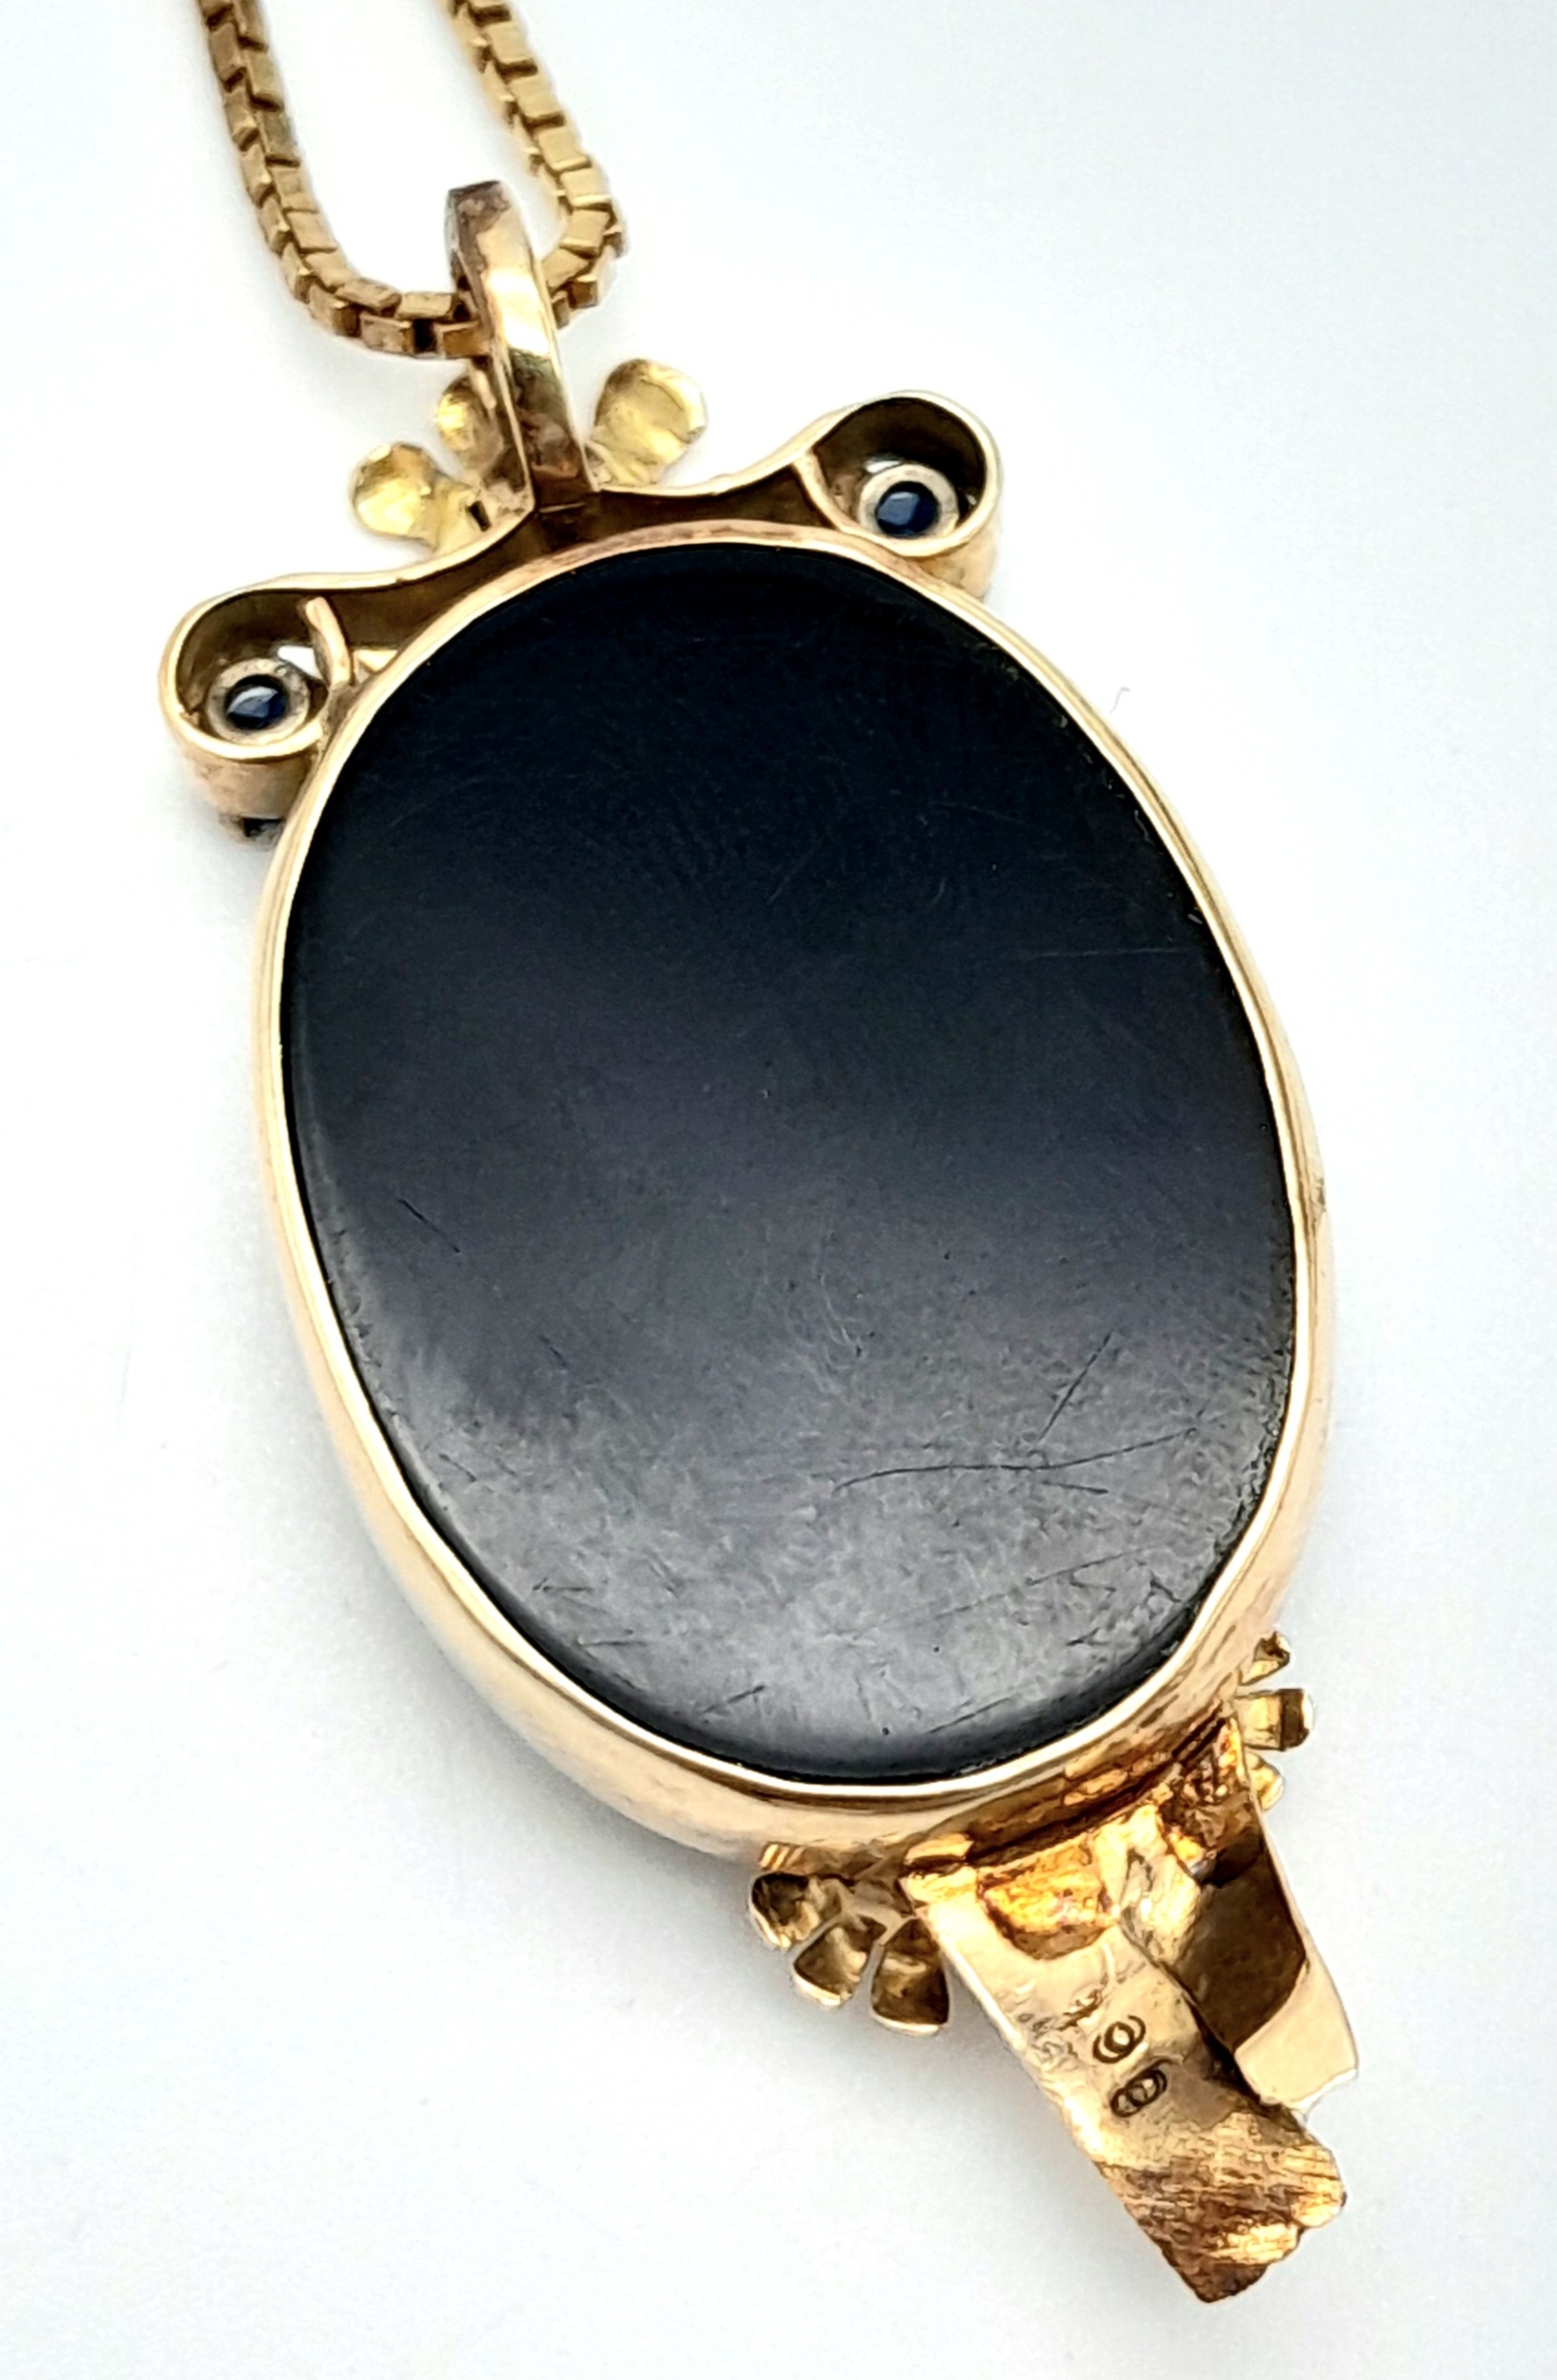 A Beautiful 9K Gold, Cameo Pendant with Sapphire and Diamond decoration on a 9K link chain. - Image 4 of 6